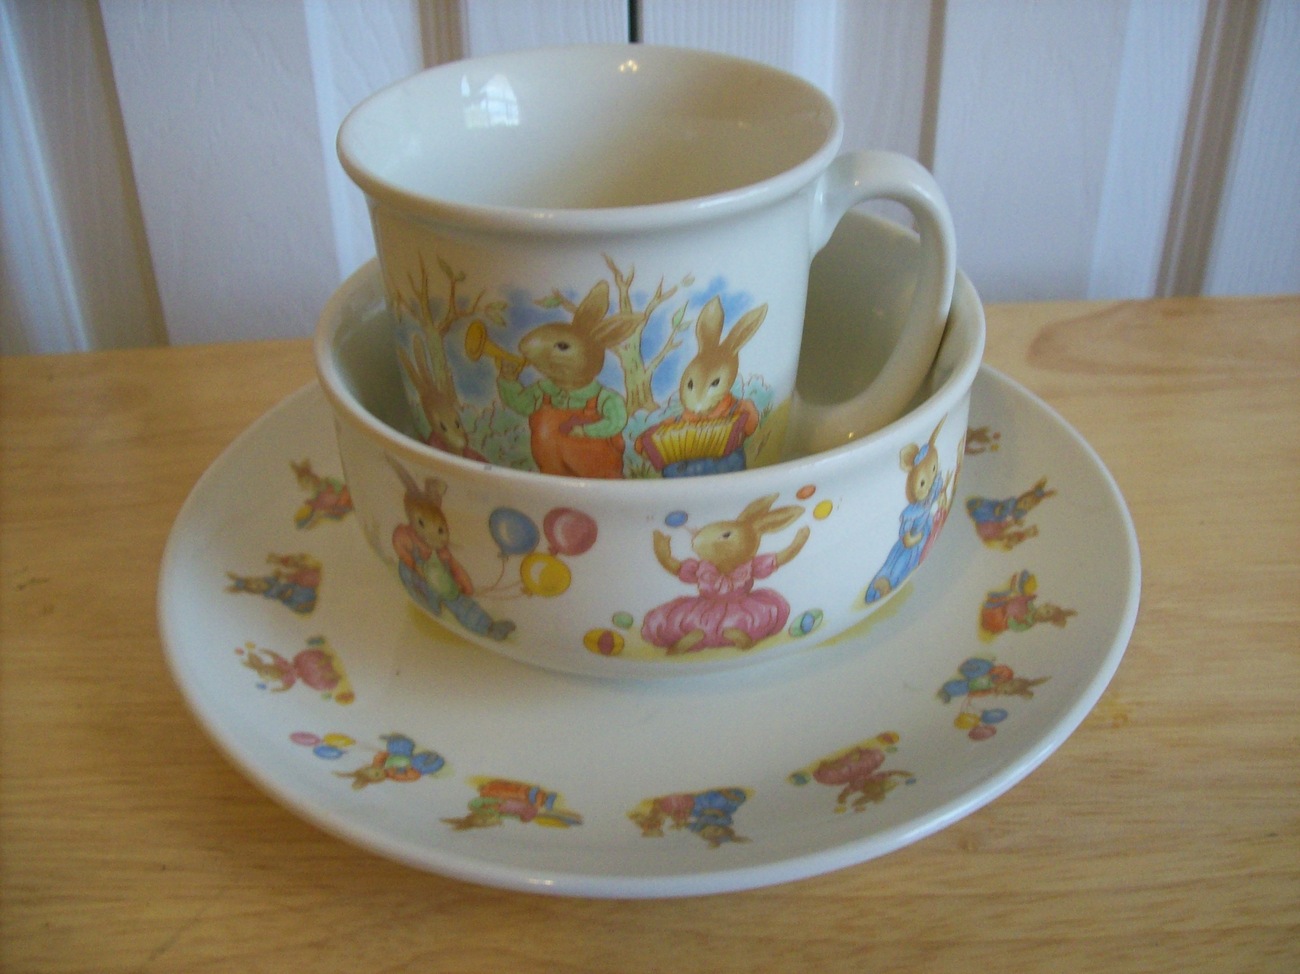 Primary image for Li'l Bunny 3pc. Child's Plate Set